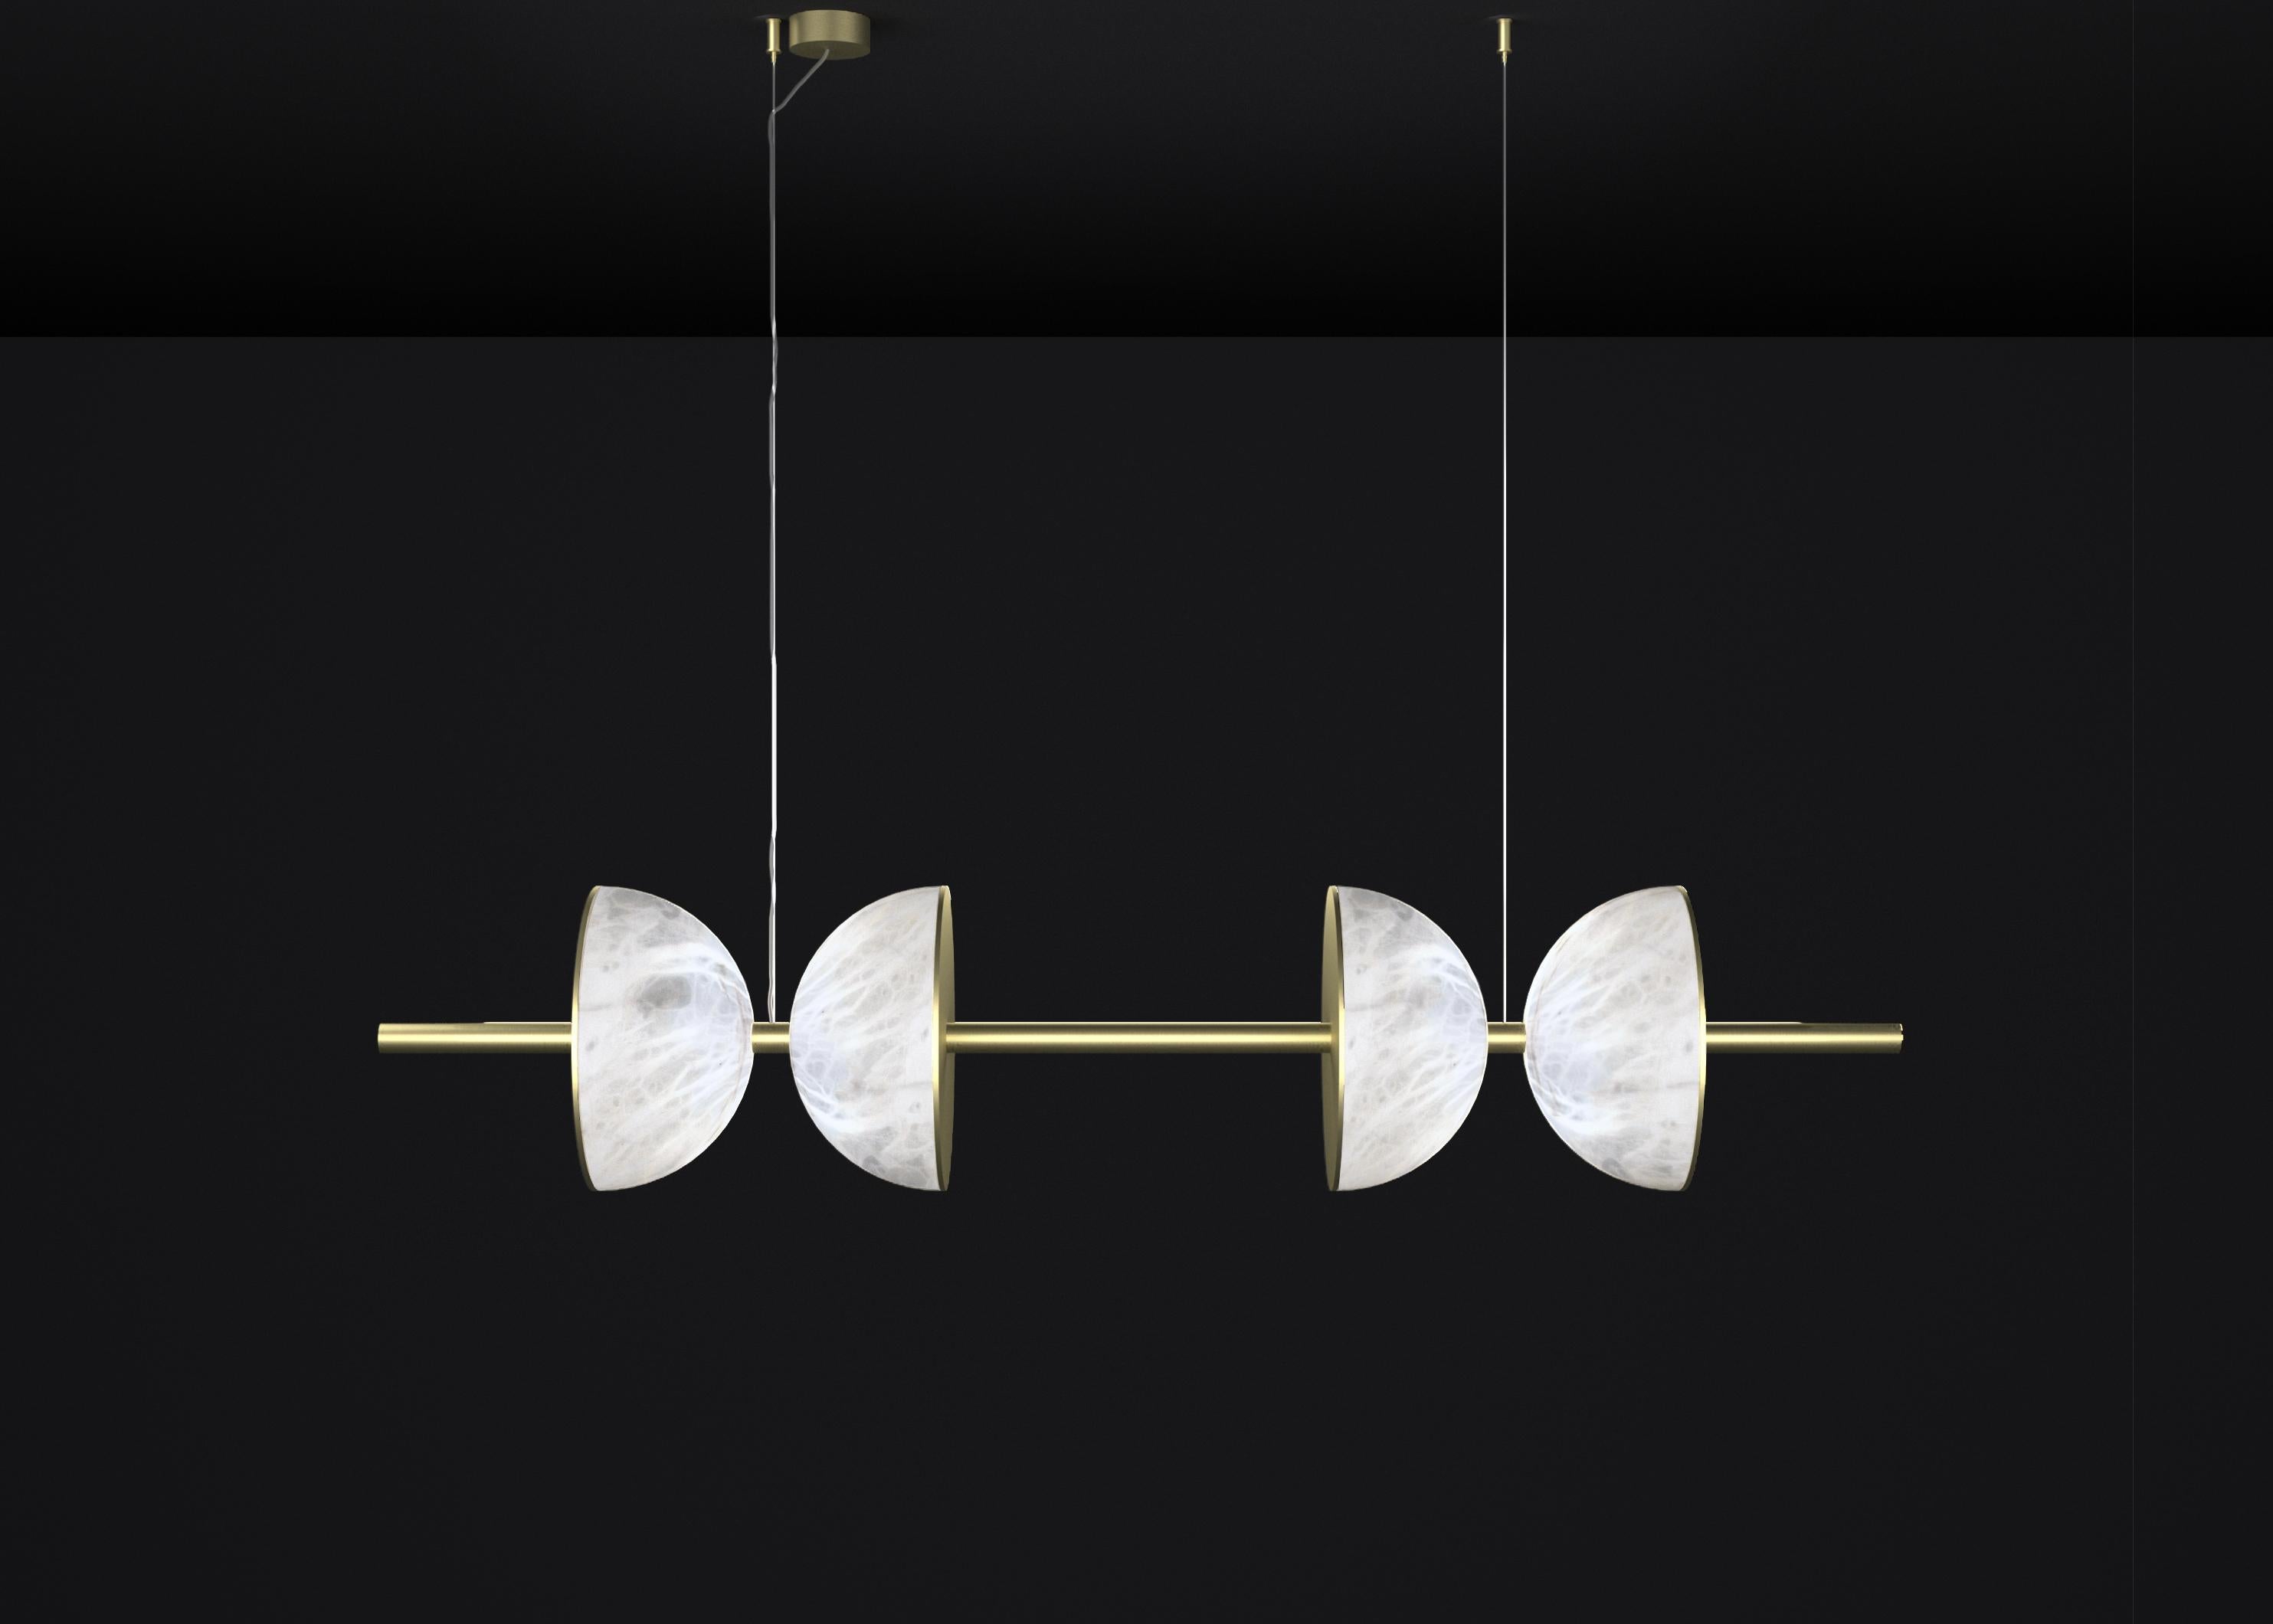 Ermes Brushed Brass And Alabaster Pendant Light 2 by Alabastro Italiano
Dimensions: D 30 x W 150 x H 300 cm.
Materials: White alabaster and brushed brass.

Available in different finishes: Shiny Silver, Bronze, Brushed Brass, Ruggine of Florence,